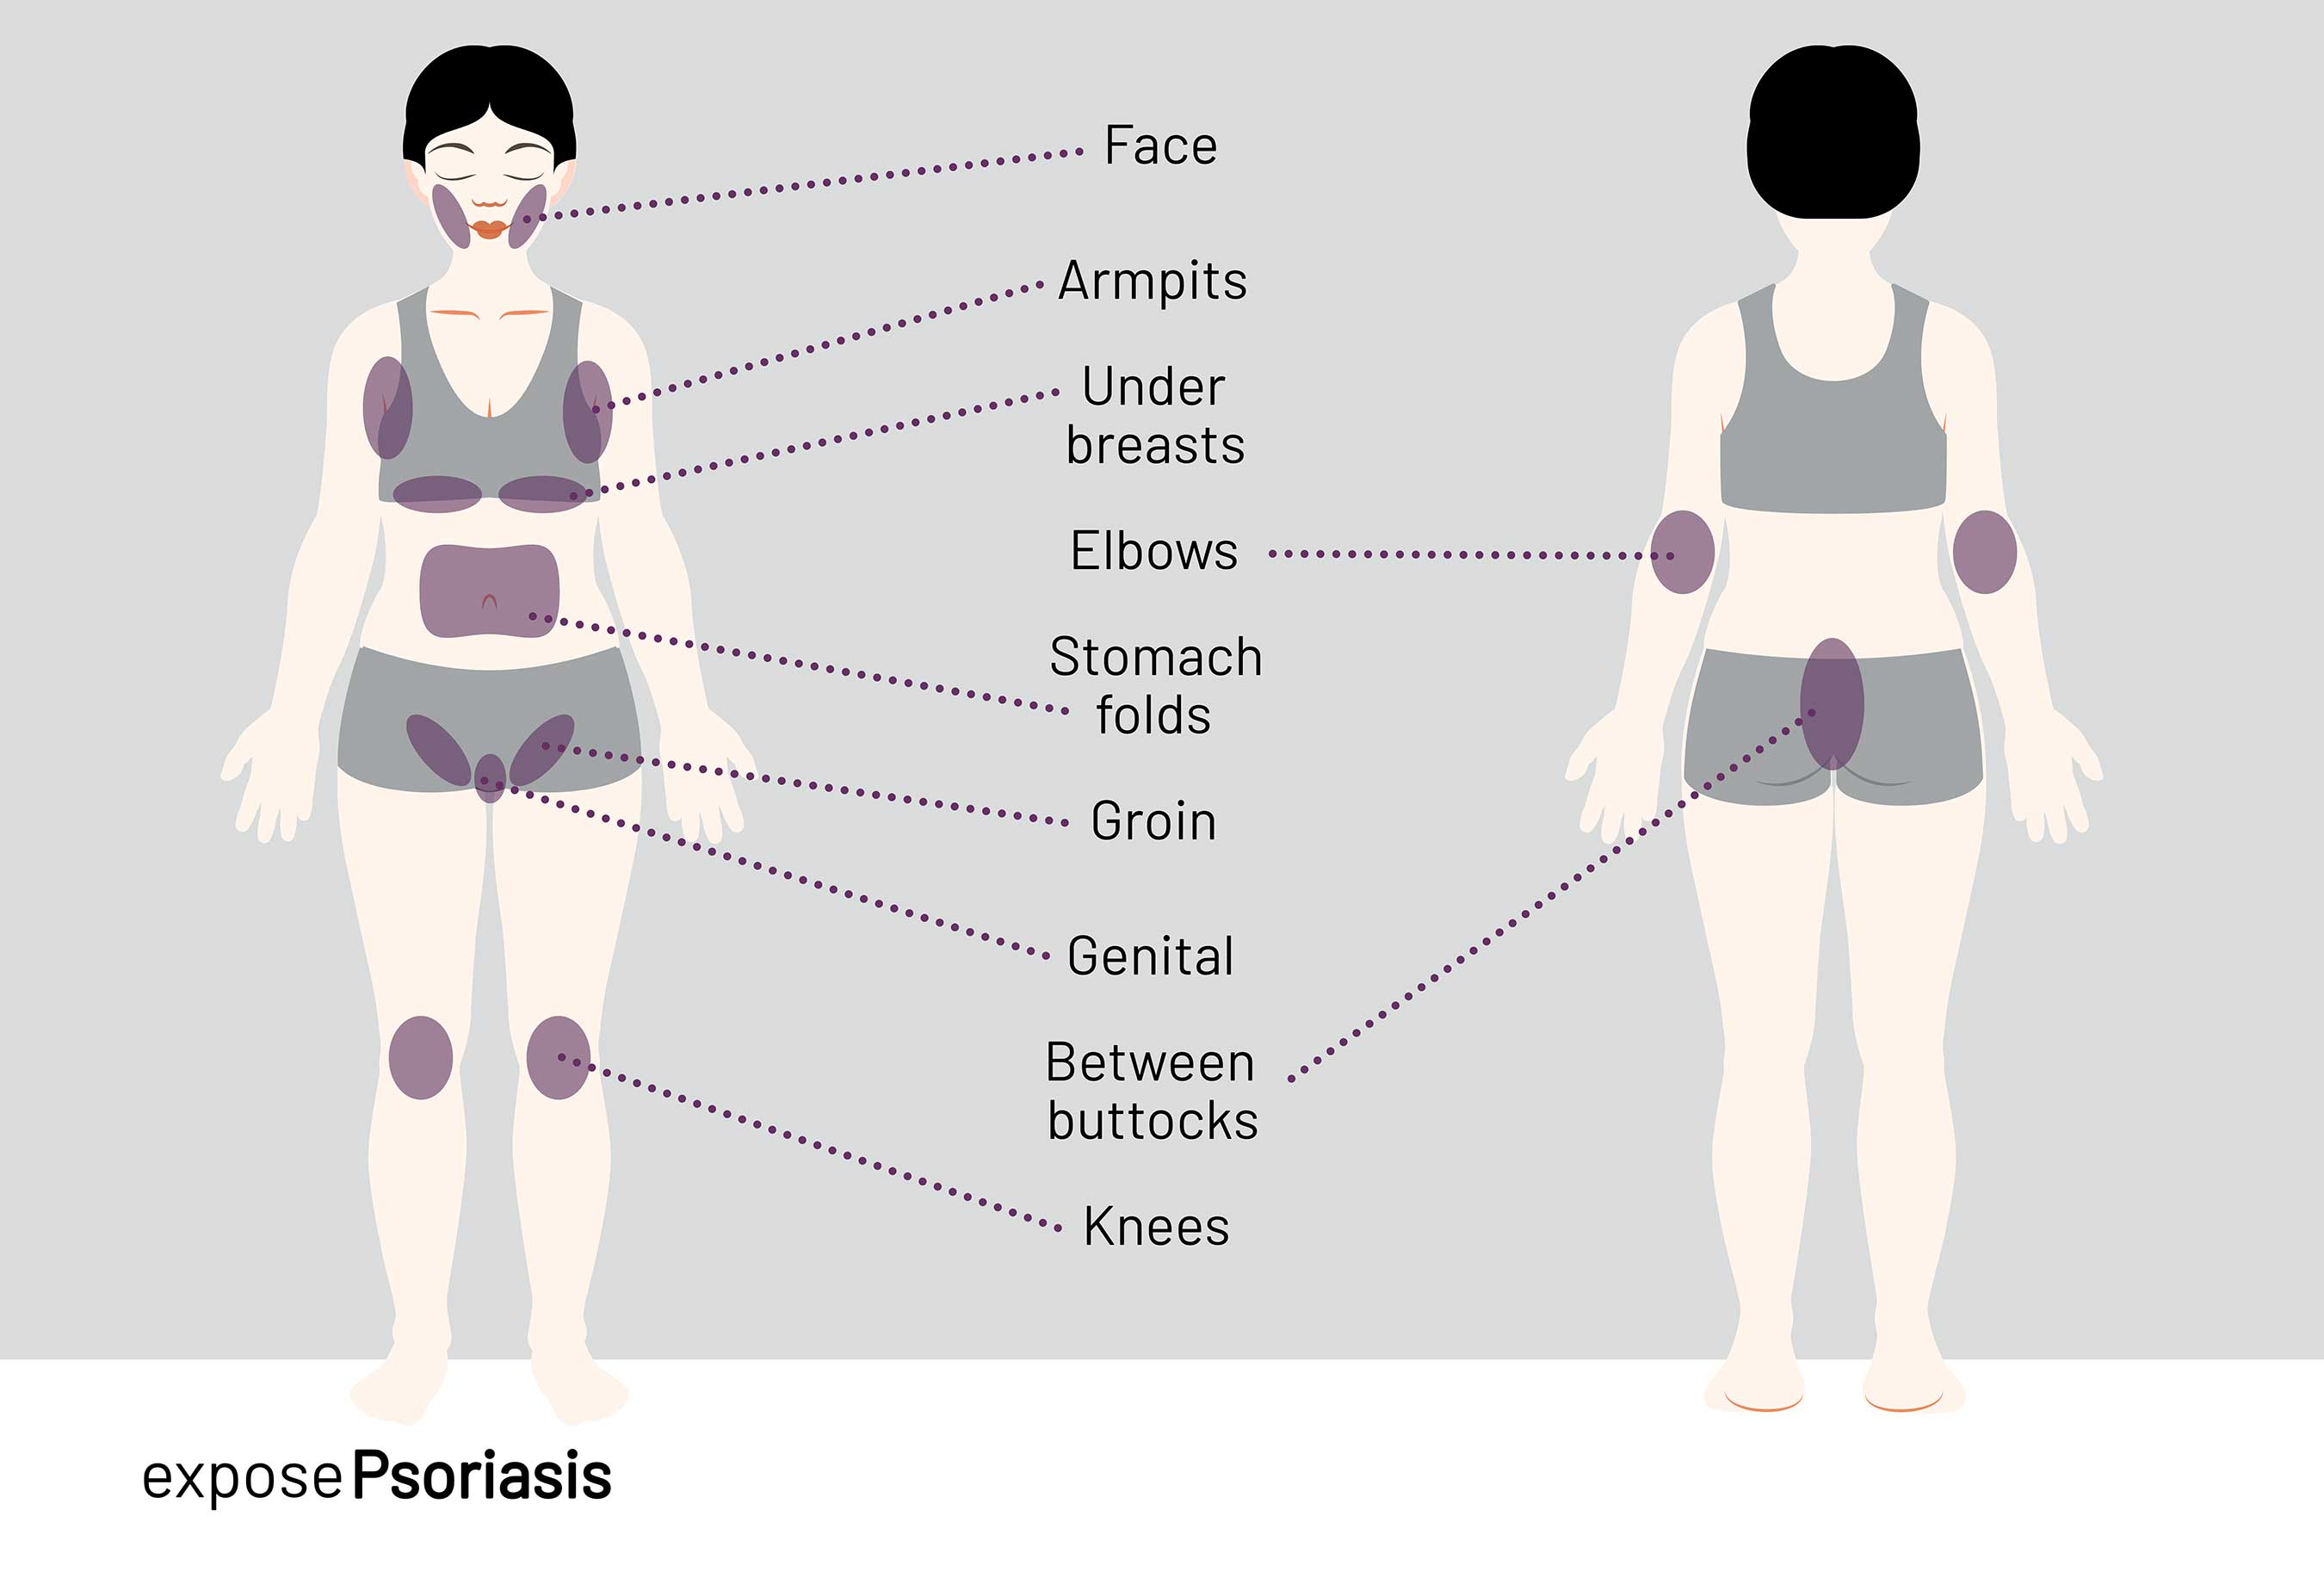 Psoriasis can occur anywhere, including the knees, elbows, torso and sensitive places like the face, genitals and areas where skin touches skin (intertriginous areas).